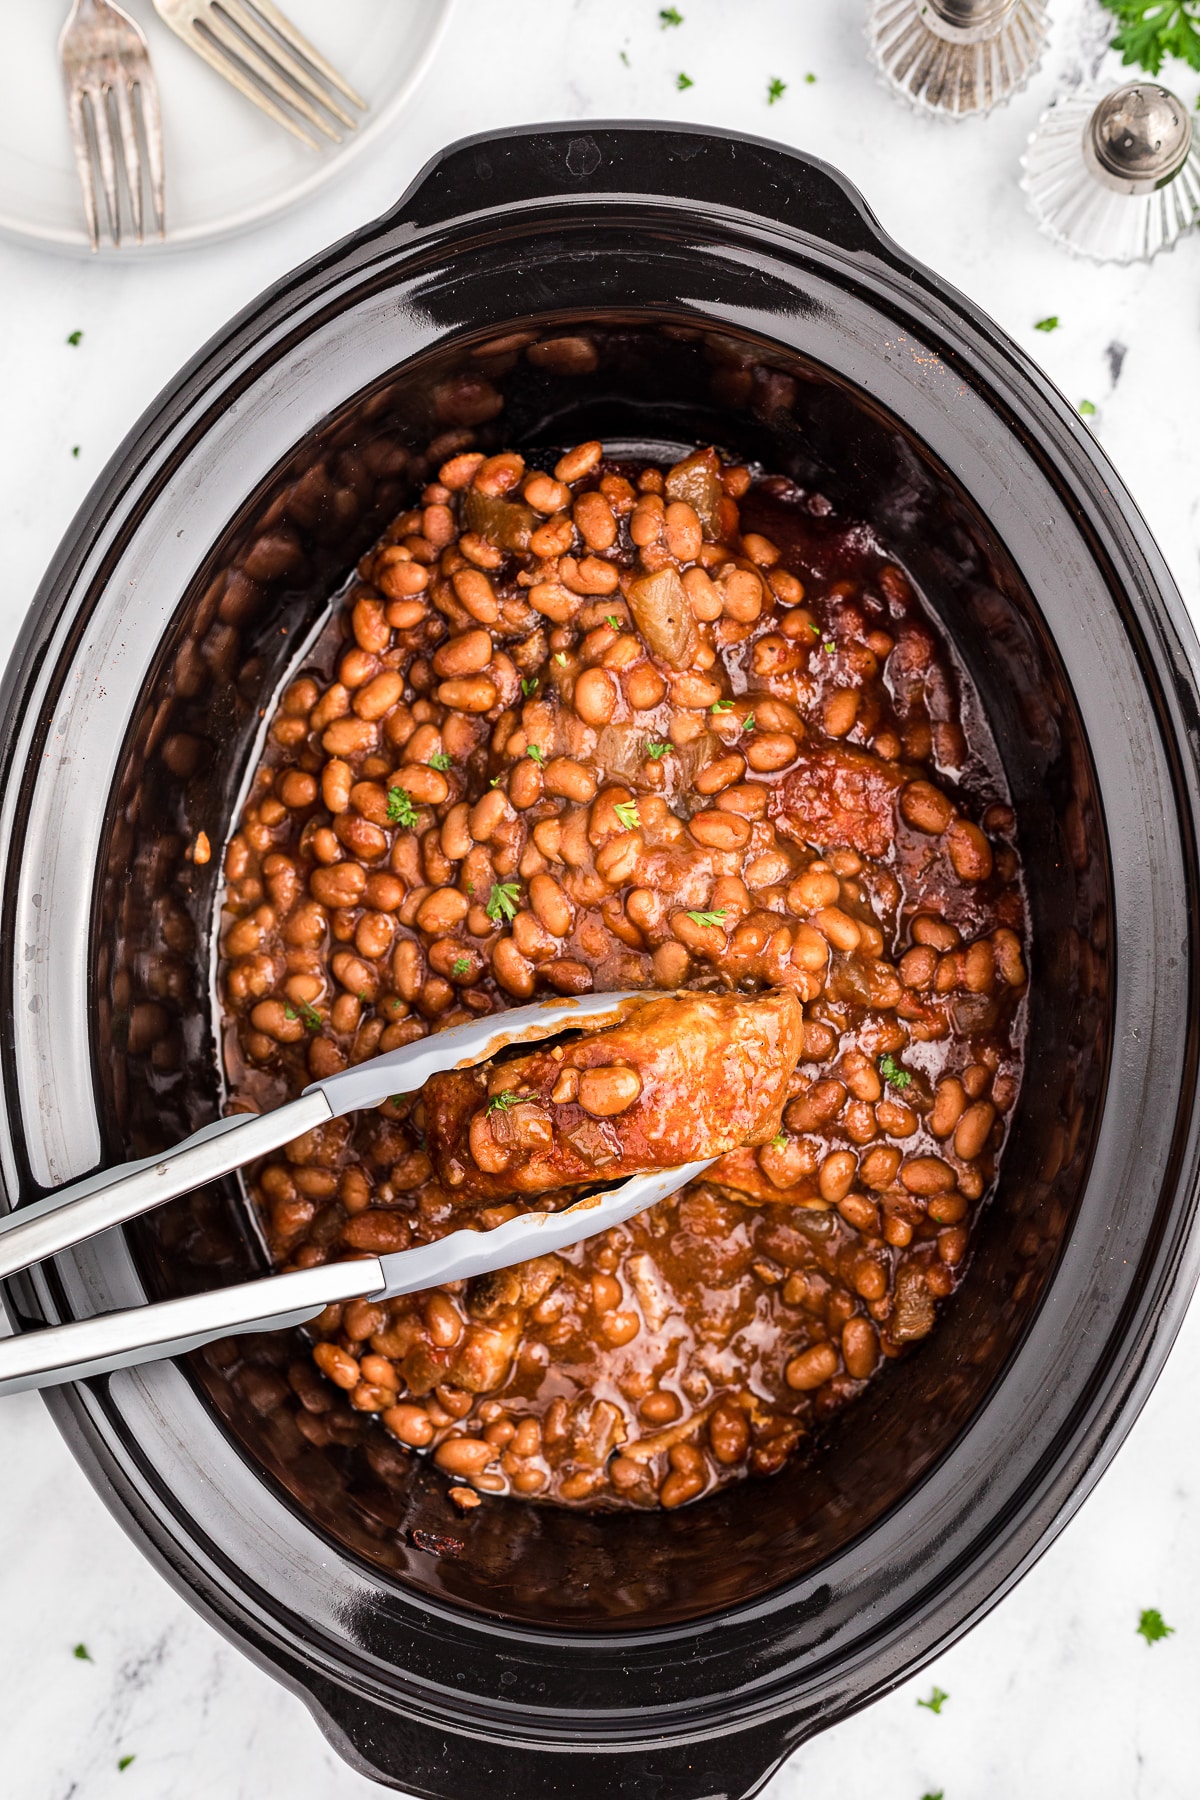 Baked beans with cooked country style ribs.